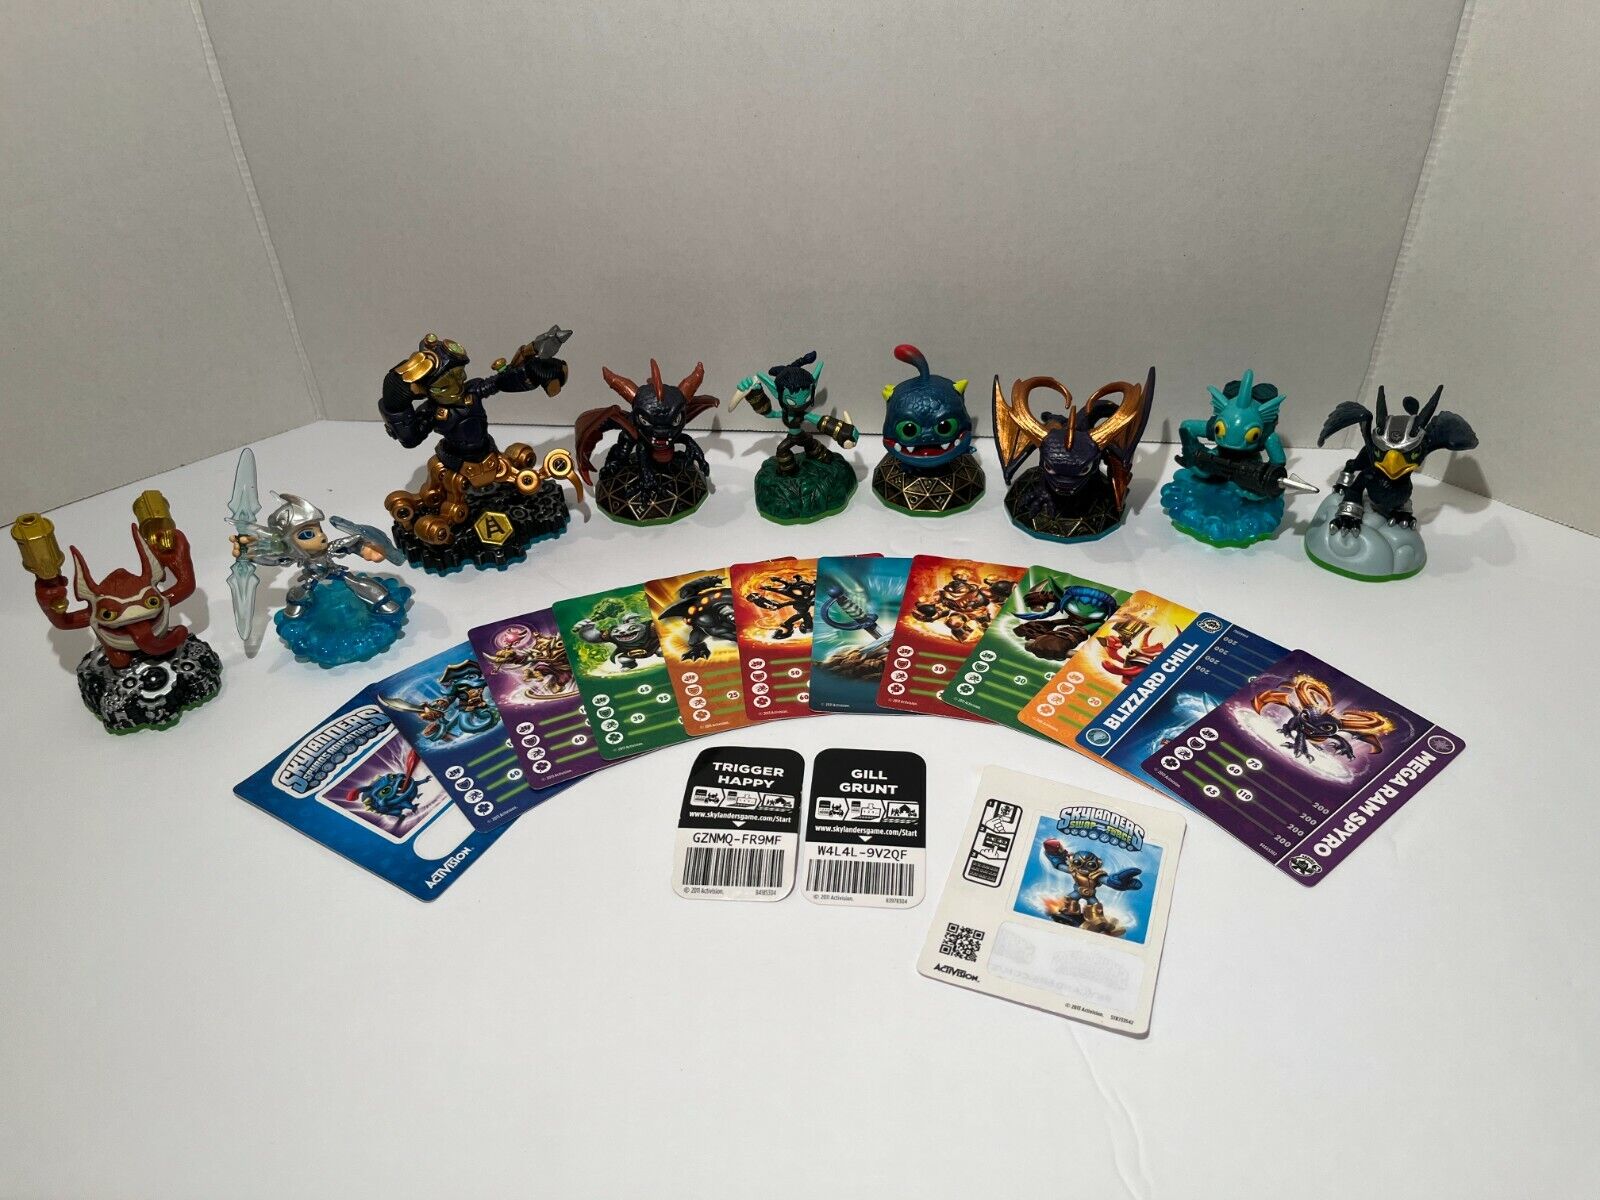 Rare Vintage Skylanders Game ActiVision Toy Collection • 21 figurines, 2011-2013